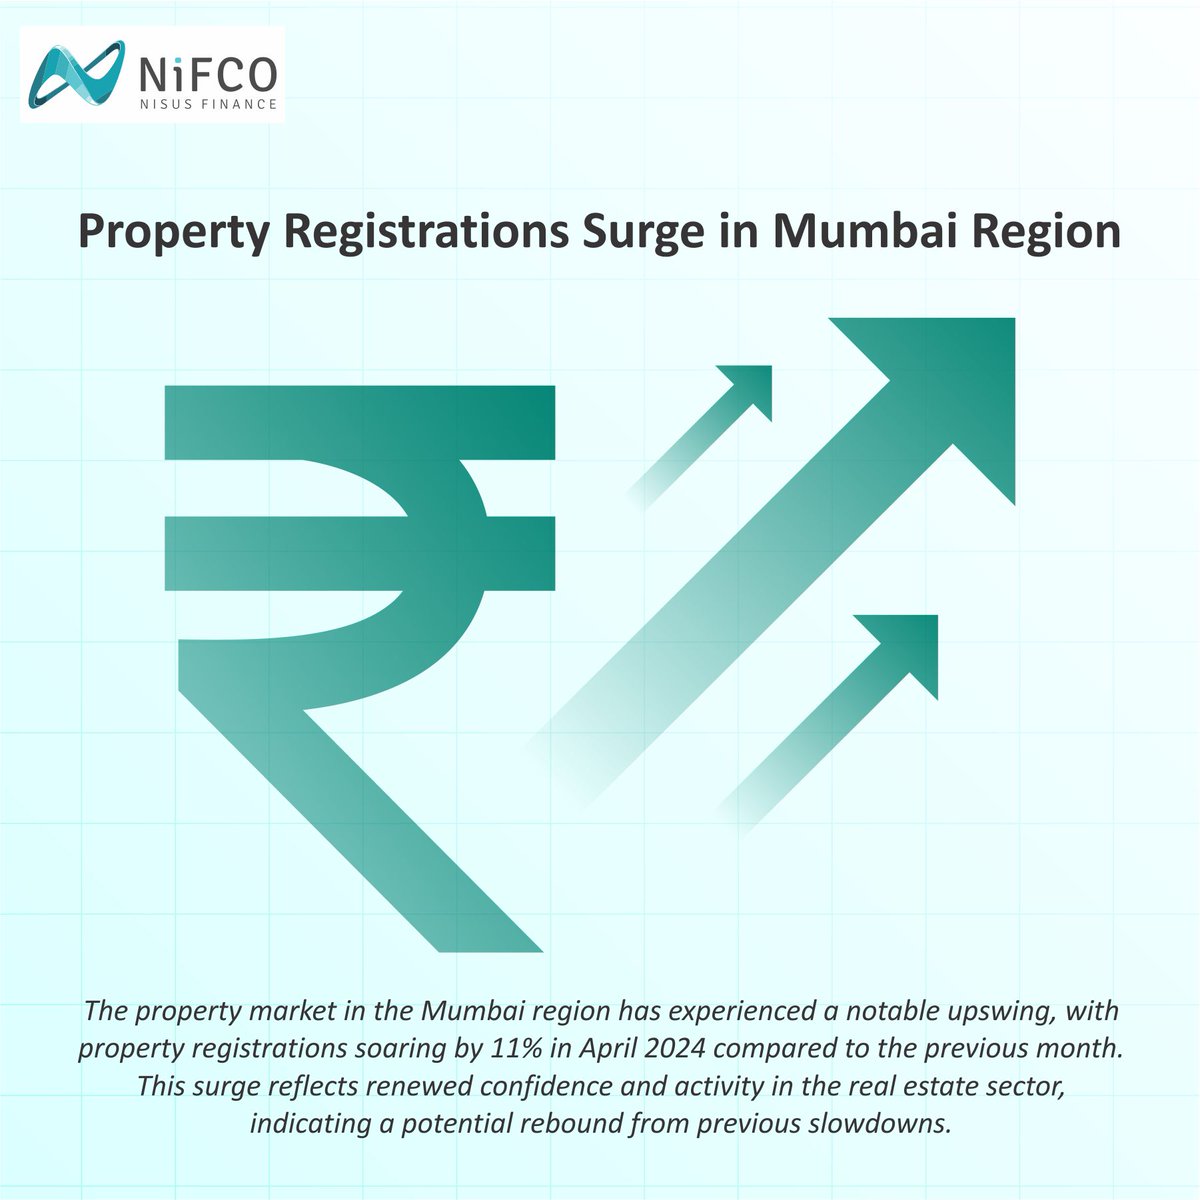 It's incredible to see the surge in real estate activity in our vibrant city!

From bustling neighborhoods to serene suburbs, Mumbai continues to captivate with its endless opportunities.

#NisusFinance #WeAreNiFCO #MumbaiRealEstate #CityOfDreams #PropertyBoom #InvestInMumbai